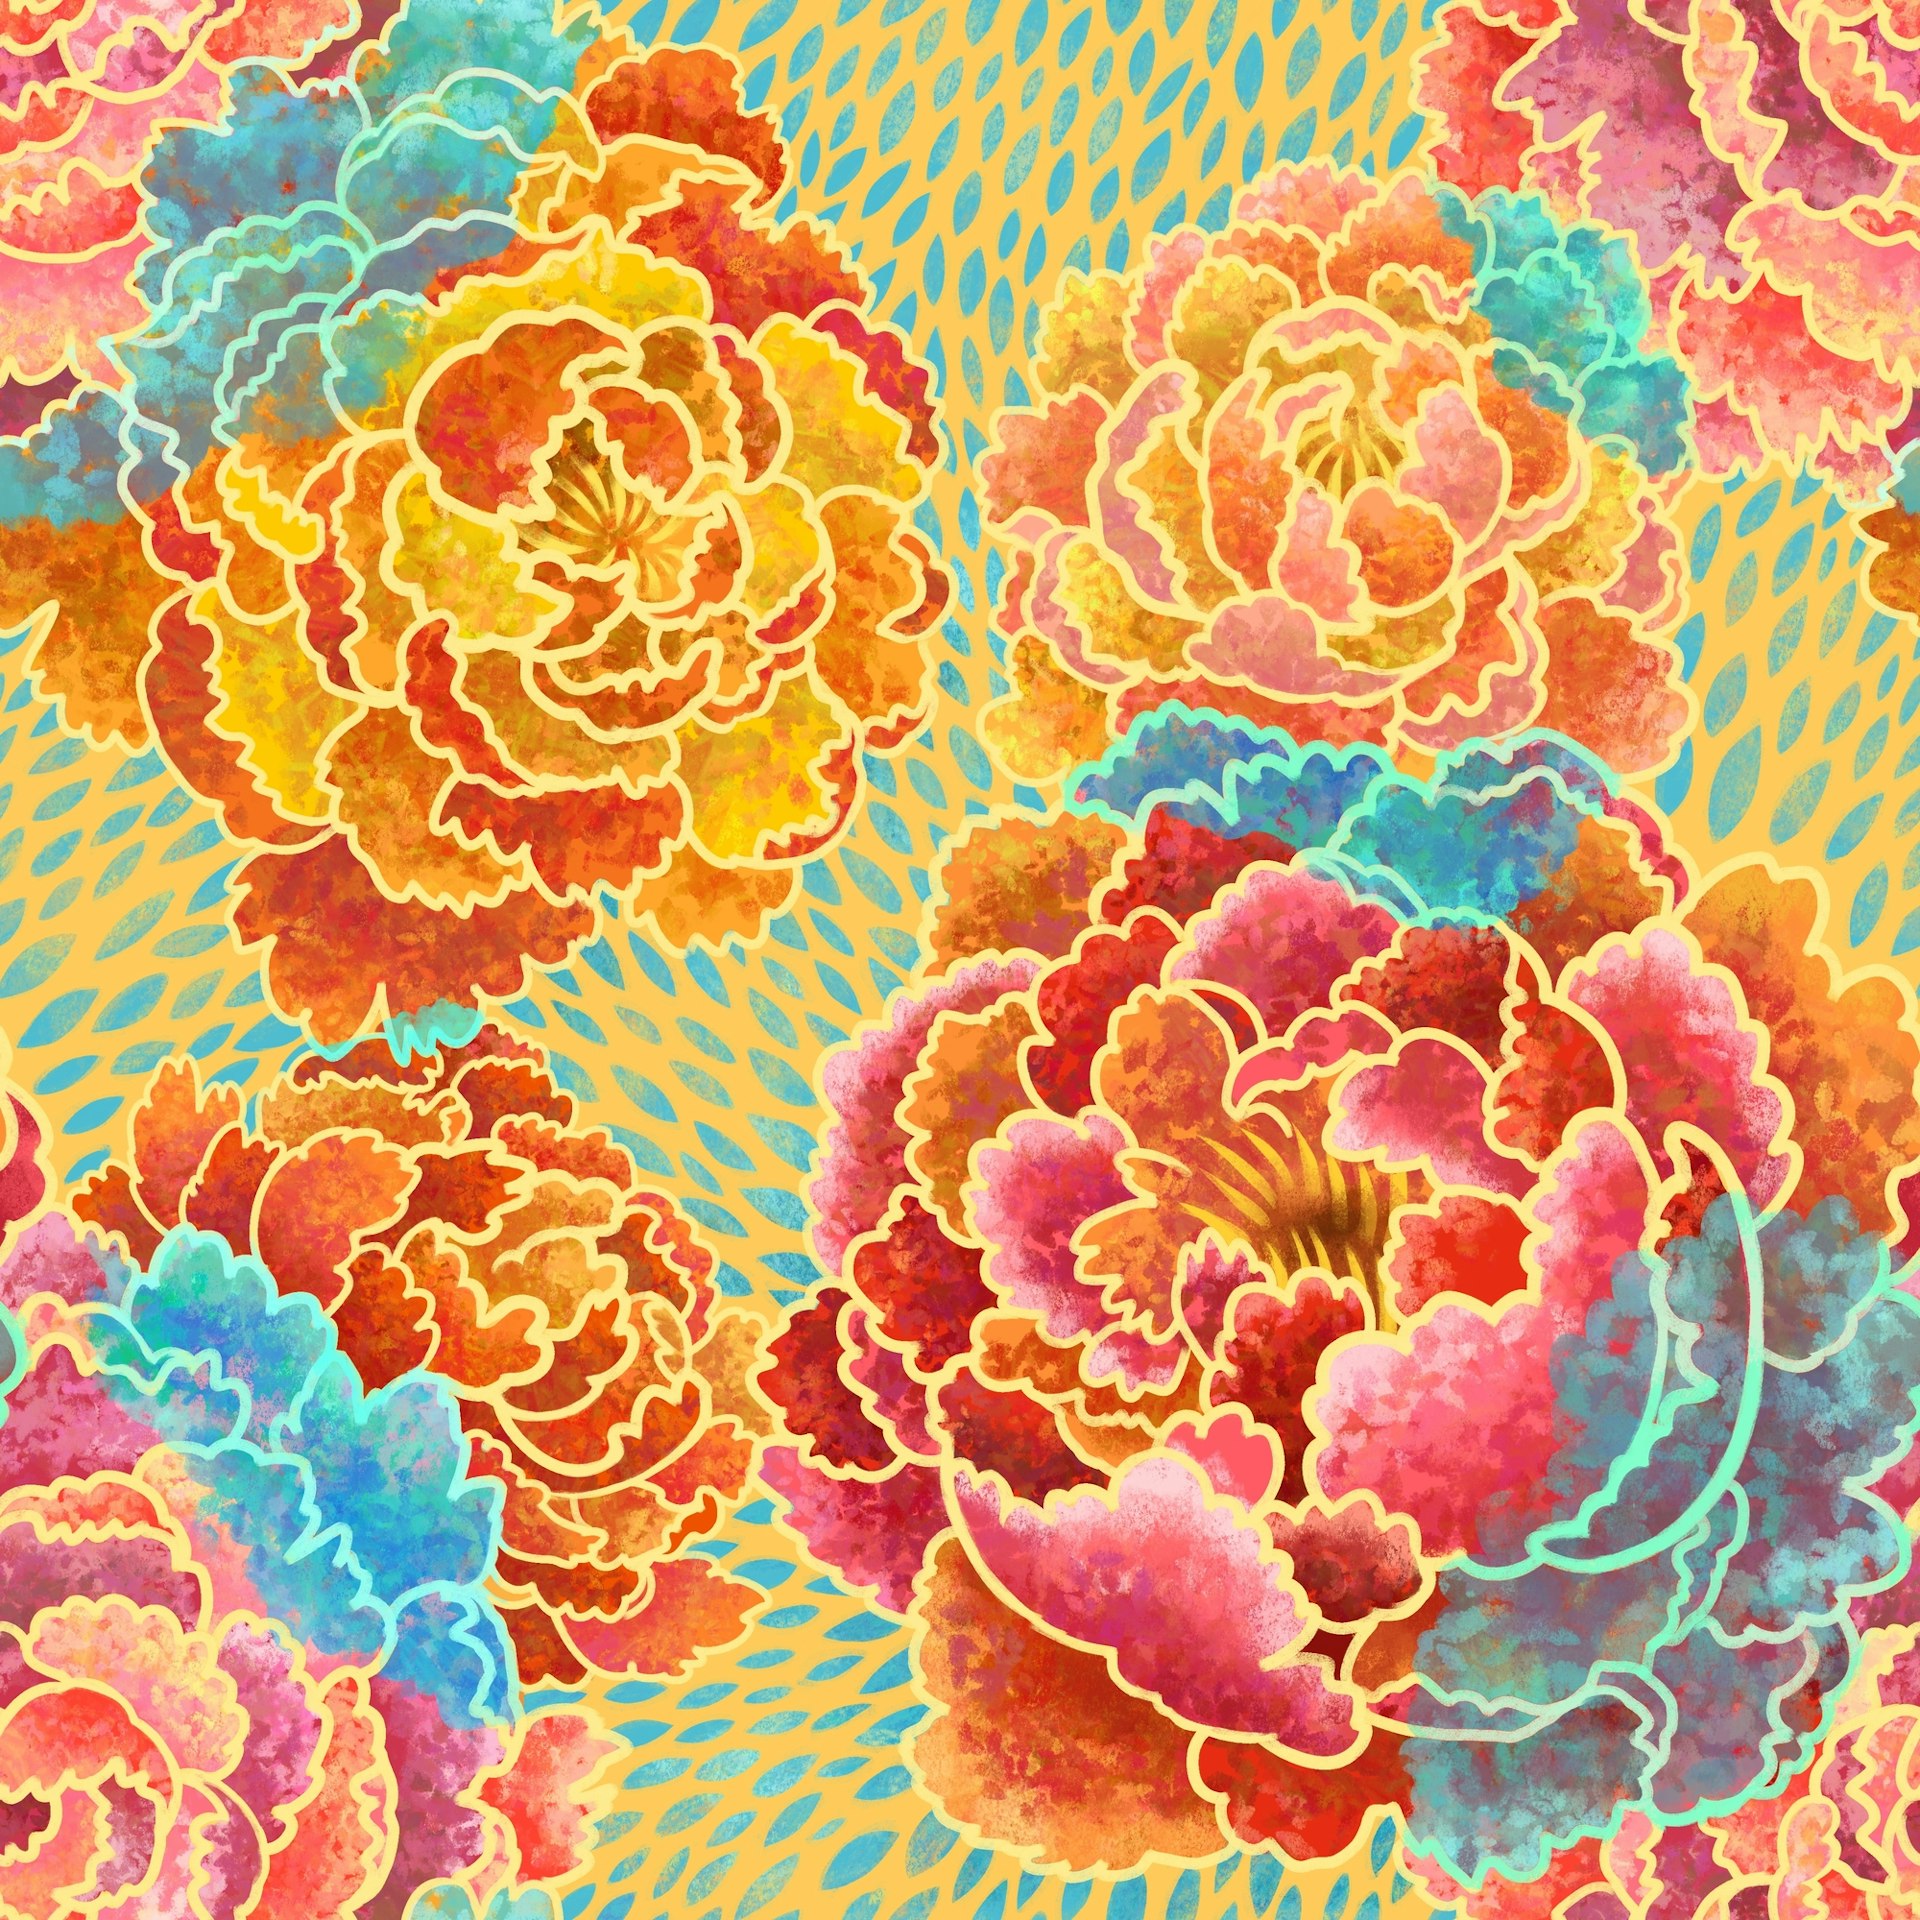 Digitally painted floral design of overlapping pink and orange peonies, done in a slightly graphic and textured style inspired by batik and Chinese papercuts. The peonies are different hues of pink and orange, while the outlines are golden, and their overlapping parts are light blue and turquoise, against a golden background with a red pattern. The pattern is repeated over a larger area.